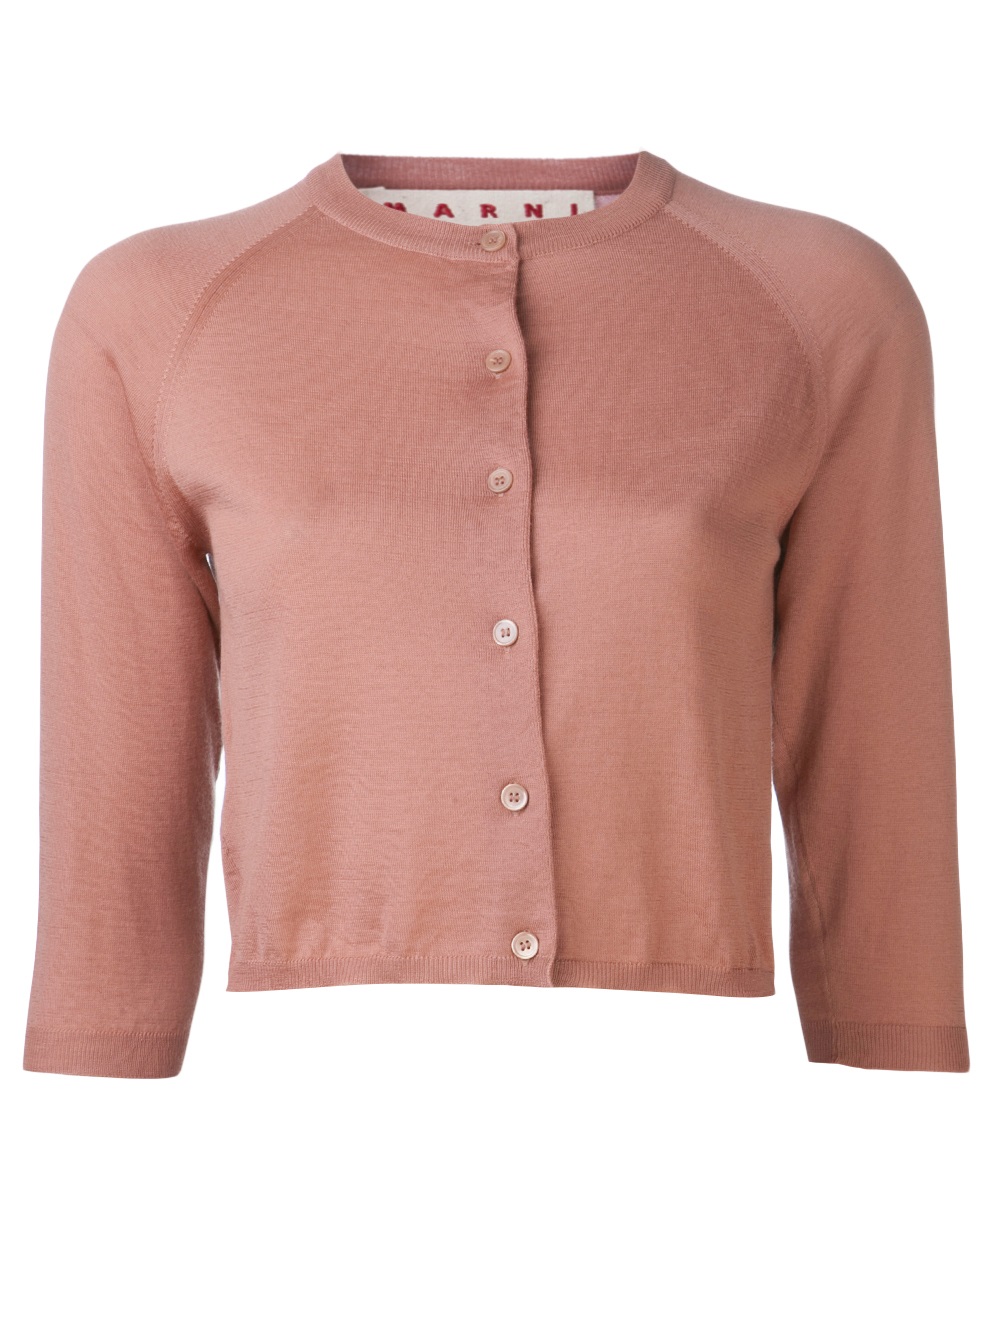 Marni Cropped Crew Neck Cardigan in Pink & Purple (Pink) - Lyst